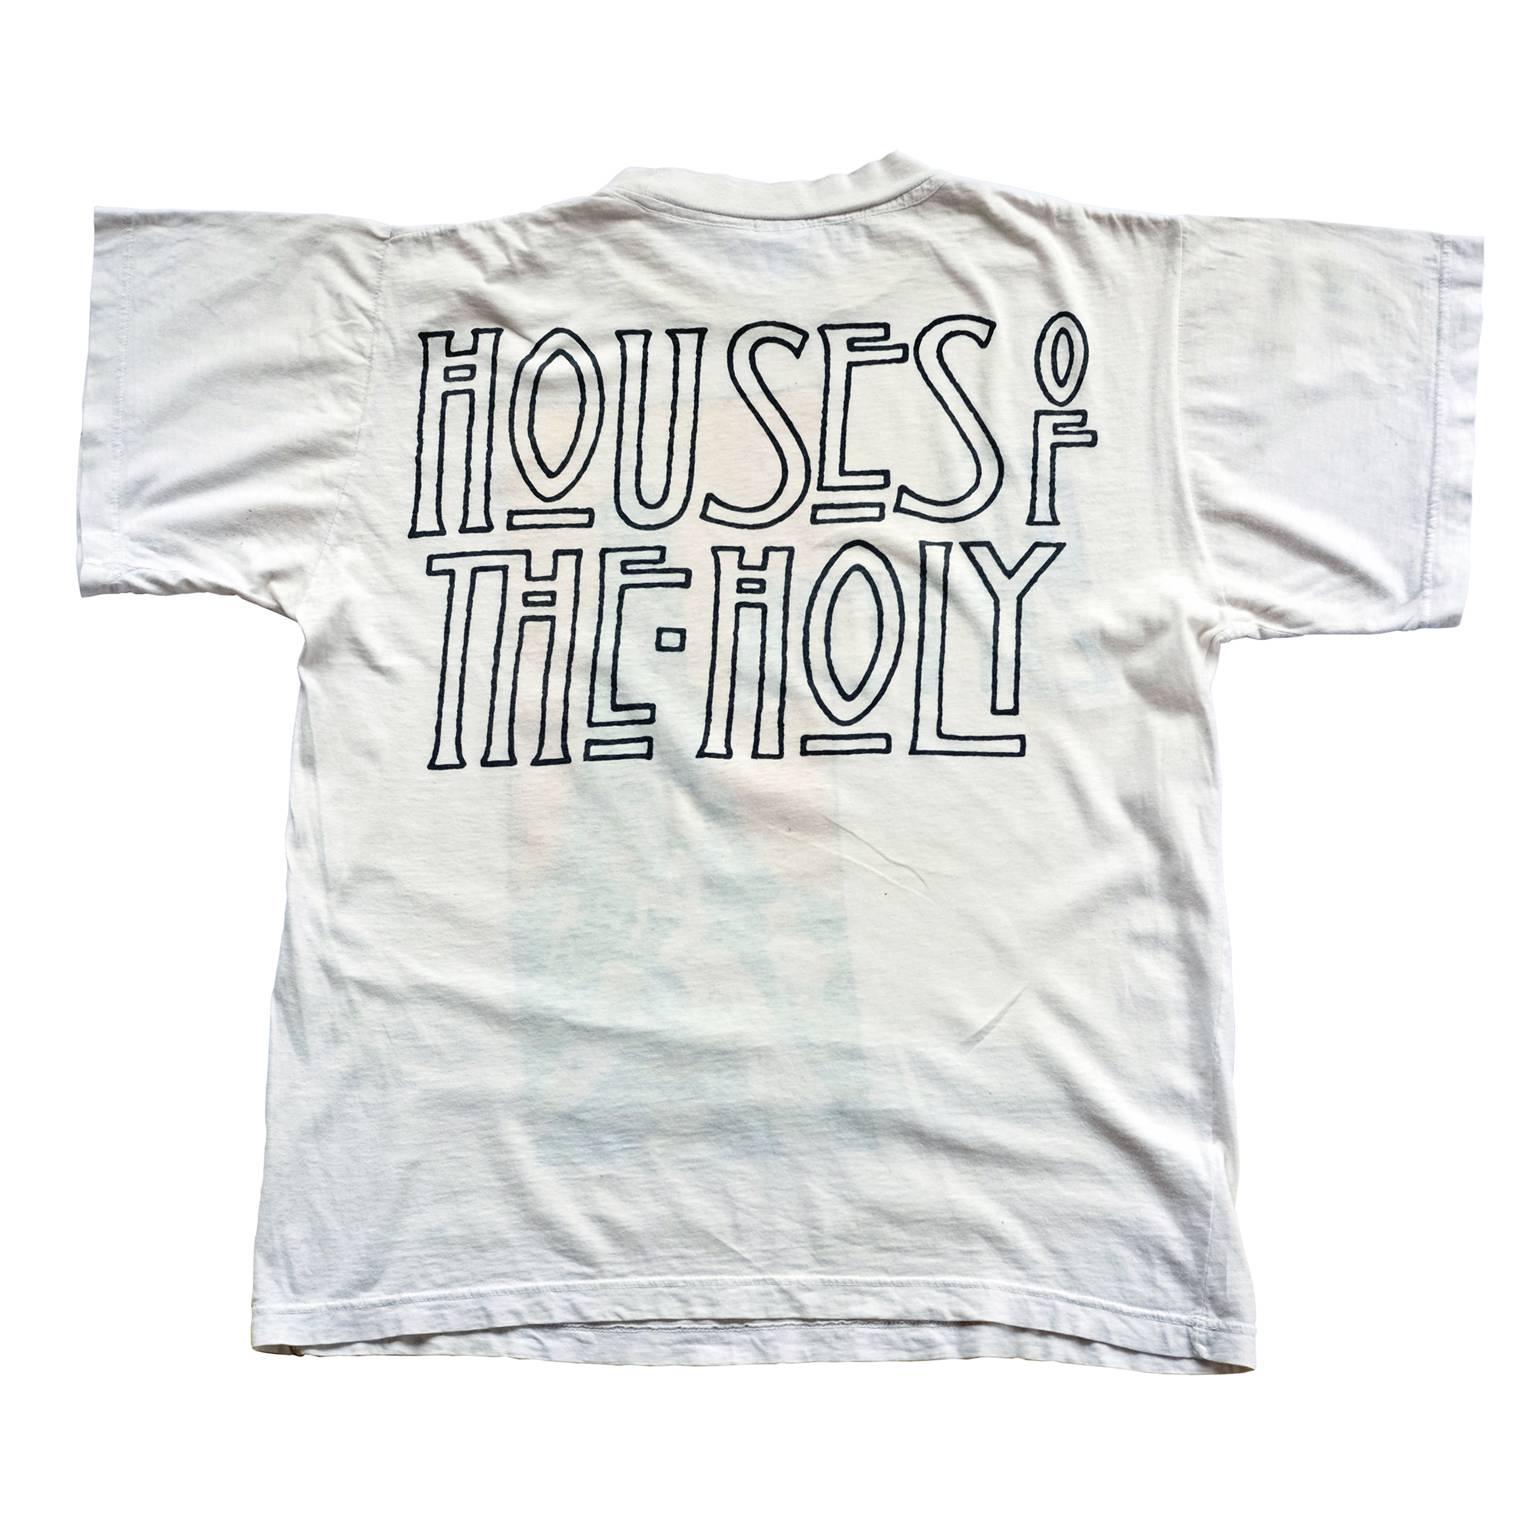 Rare original 1988 T-shirt for Led Zeppelin's Houses of the Holy.

This T-shirt is in vintage condition with signs of age.
100% cotton, size Large.